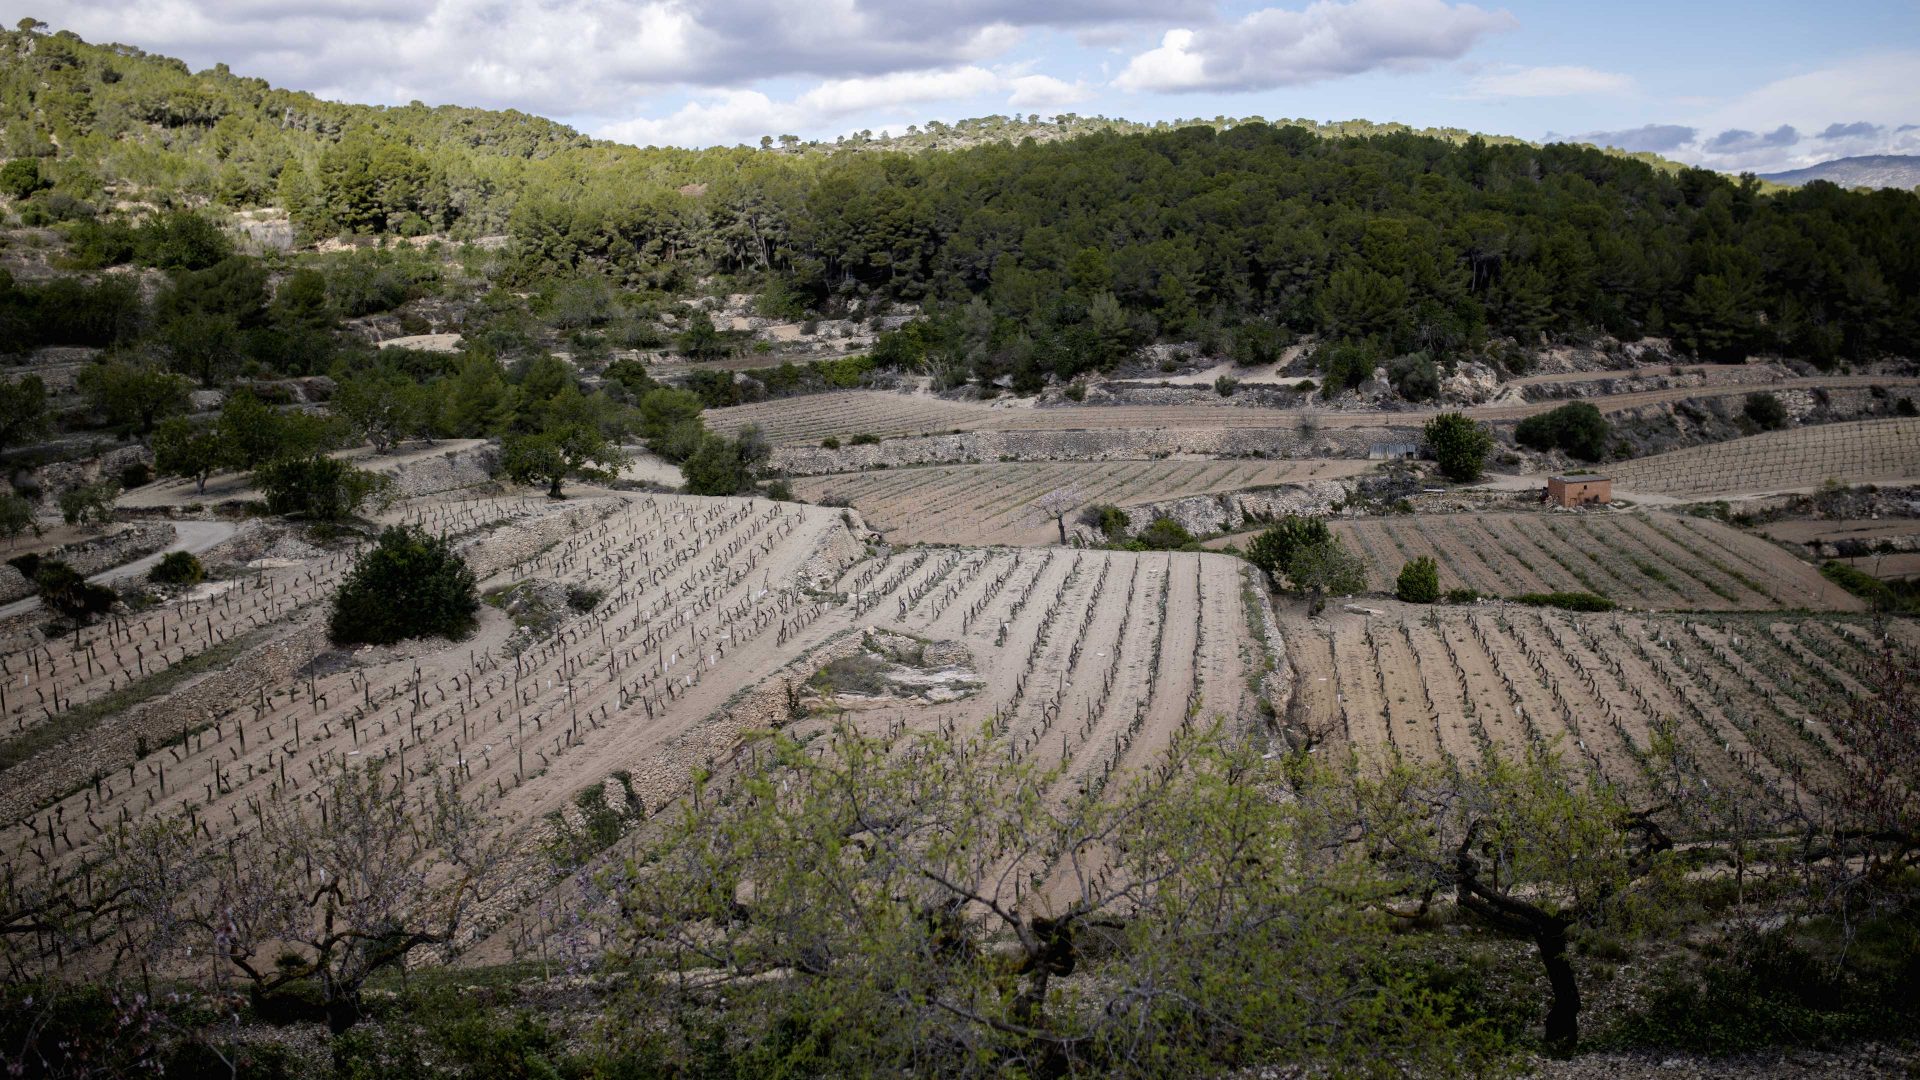 Farmers pray for relief from the ongoing drought in the rural town of Albinyana, in Catalonia's famous Penedes wine region. Photo: Lorena Sopena/Anadolu via Getty Images